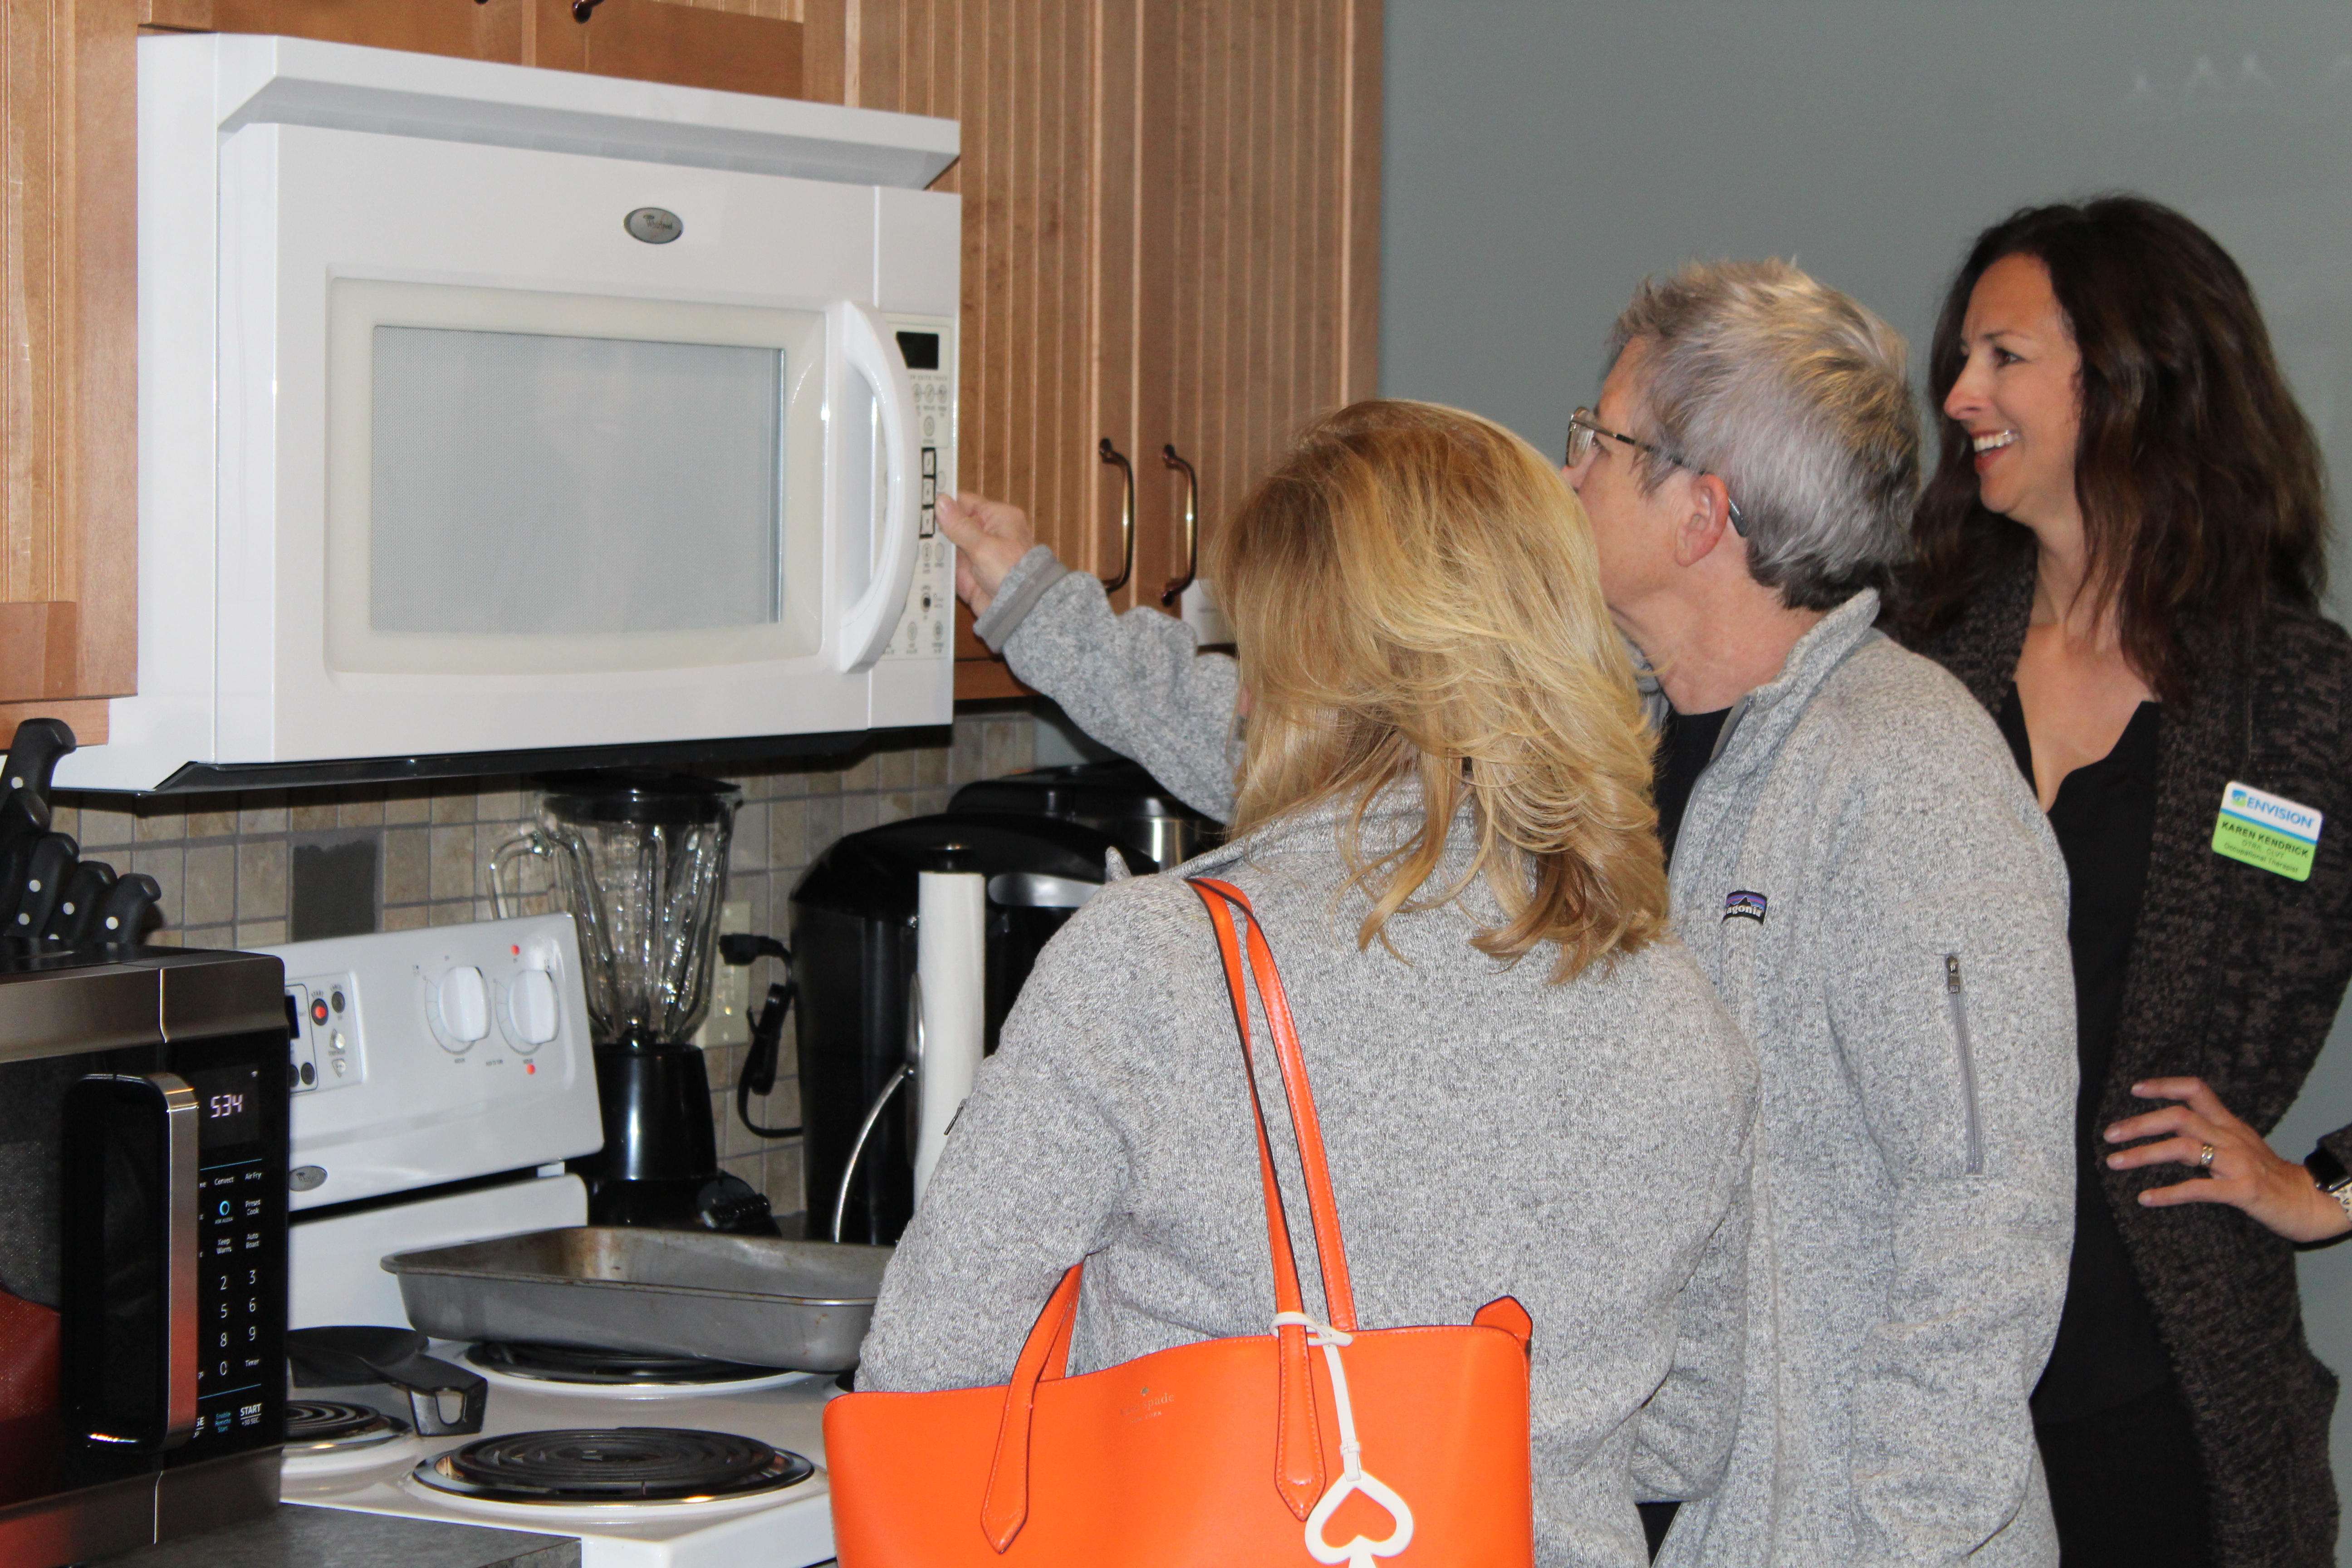 Envision Occupational Therapist shows Grand Rounds guests the accessibility of the microwave in the EVRC kitchen